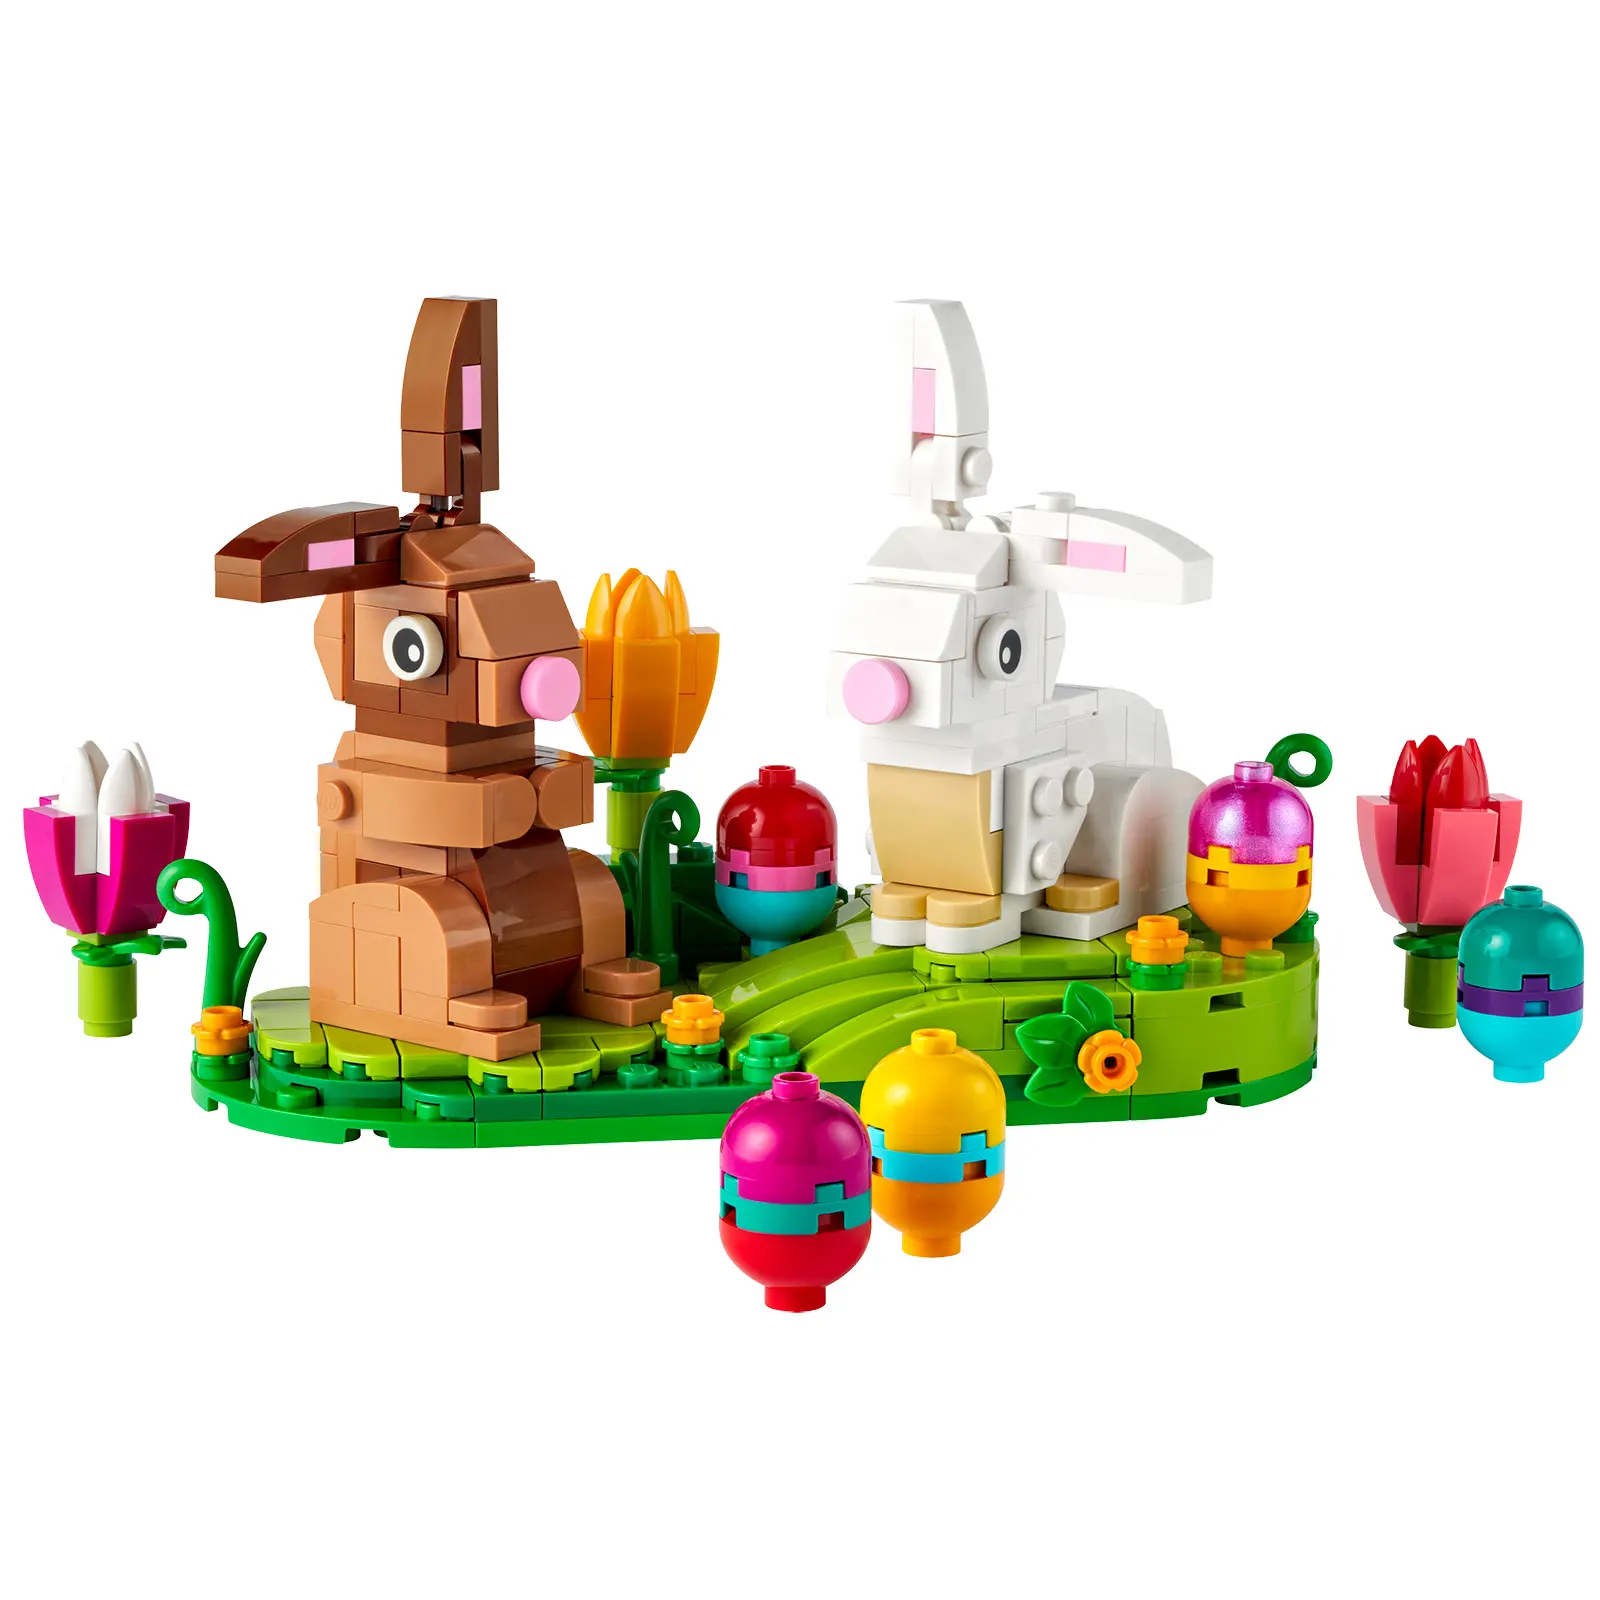 LEGO 40523 Easter Bunnies 2022 Easter New Products Revealed | New for Feb 1st 2022